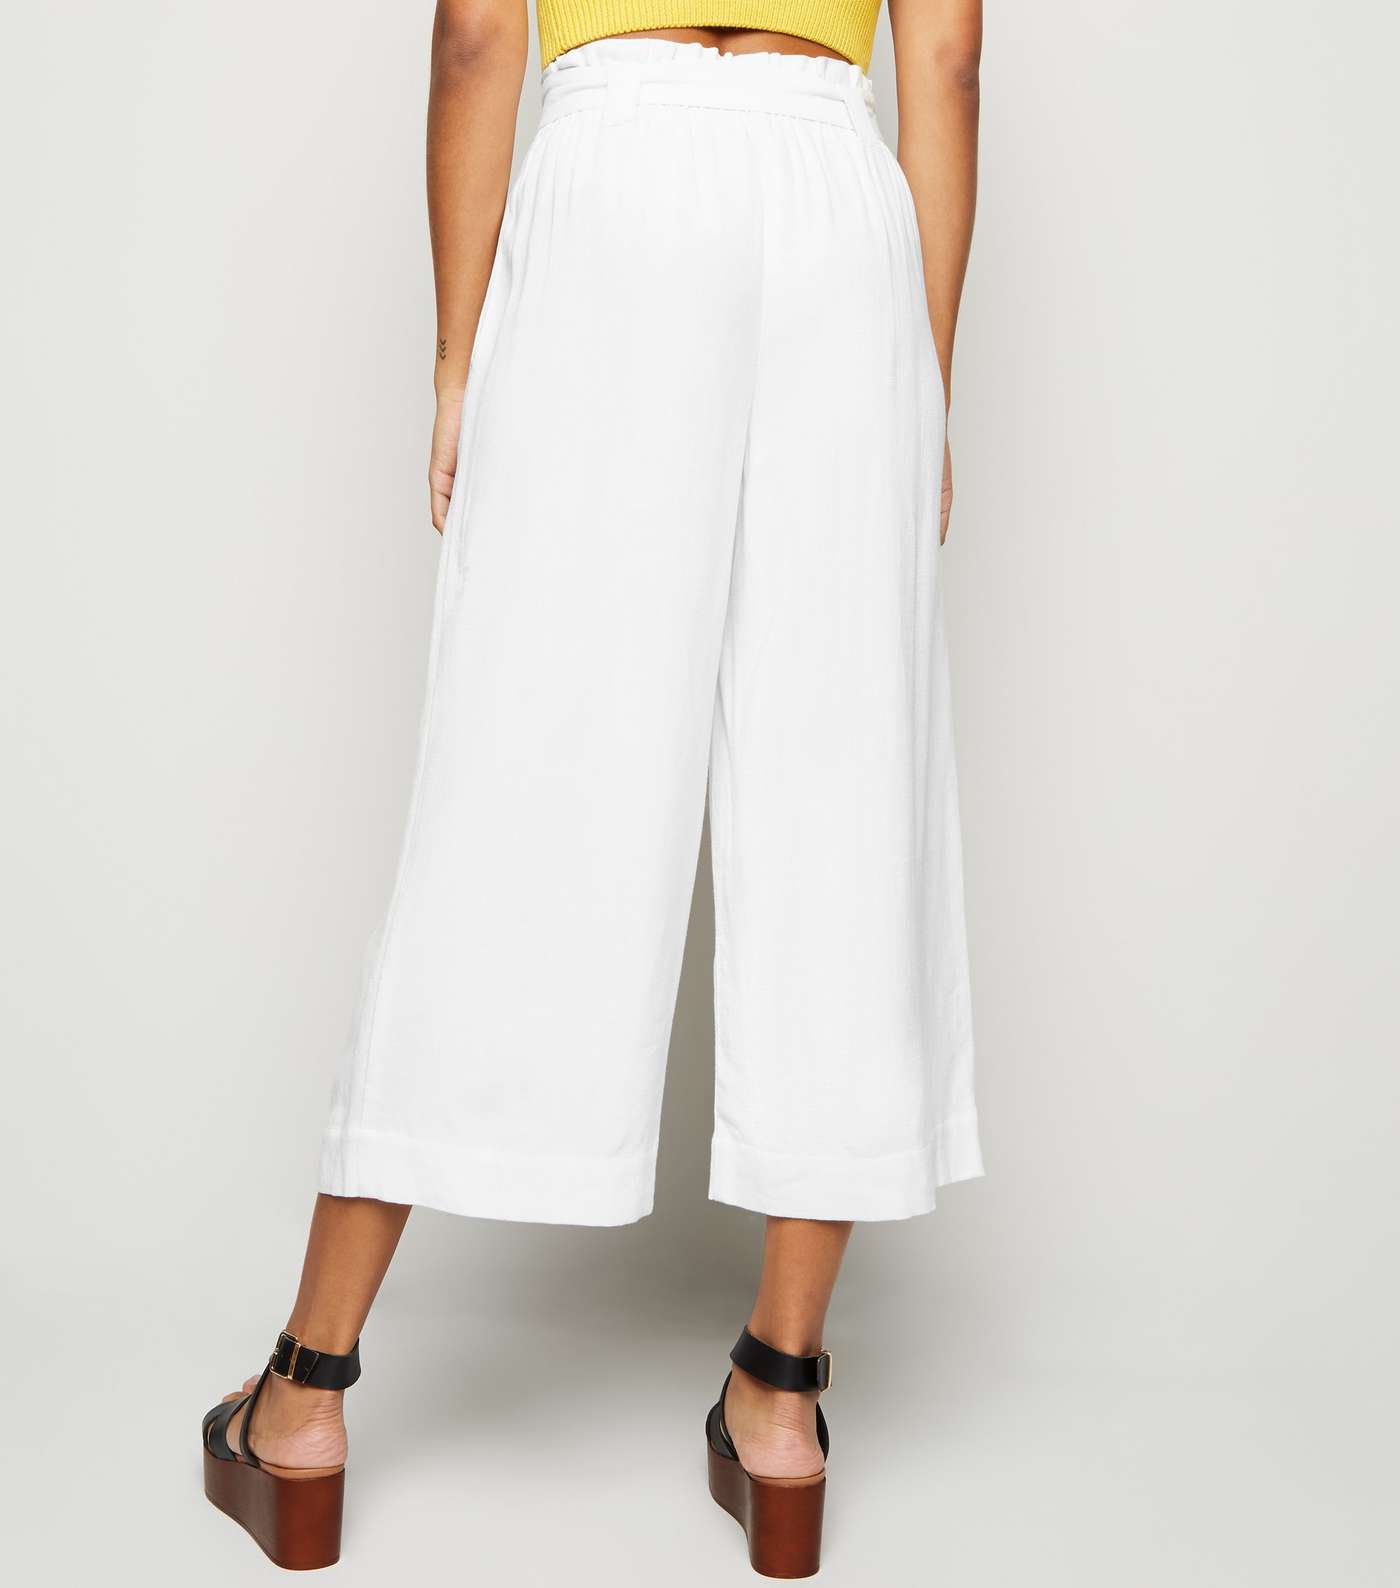 Off White Linen Look Crop Trousers Image 3